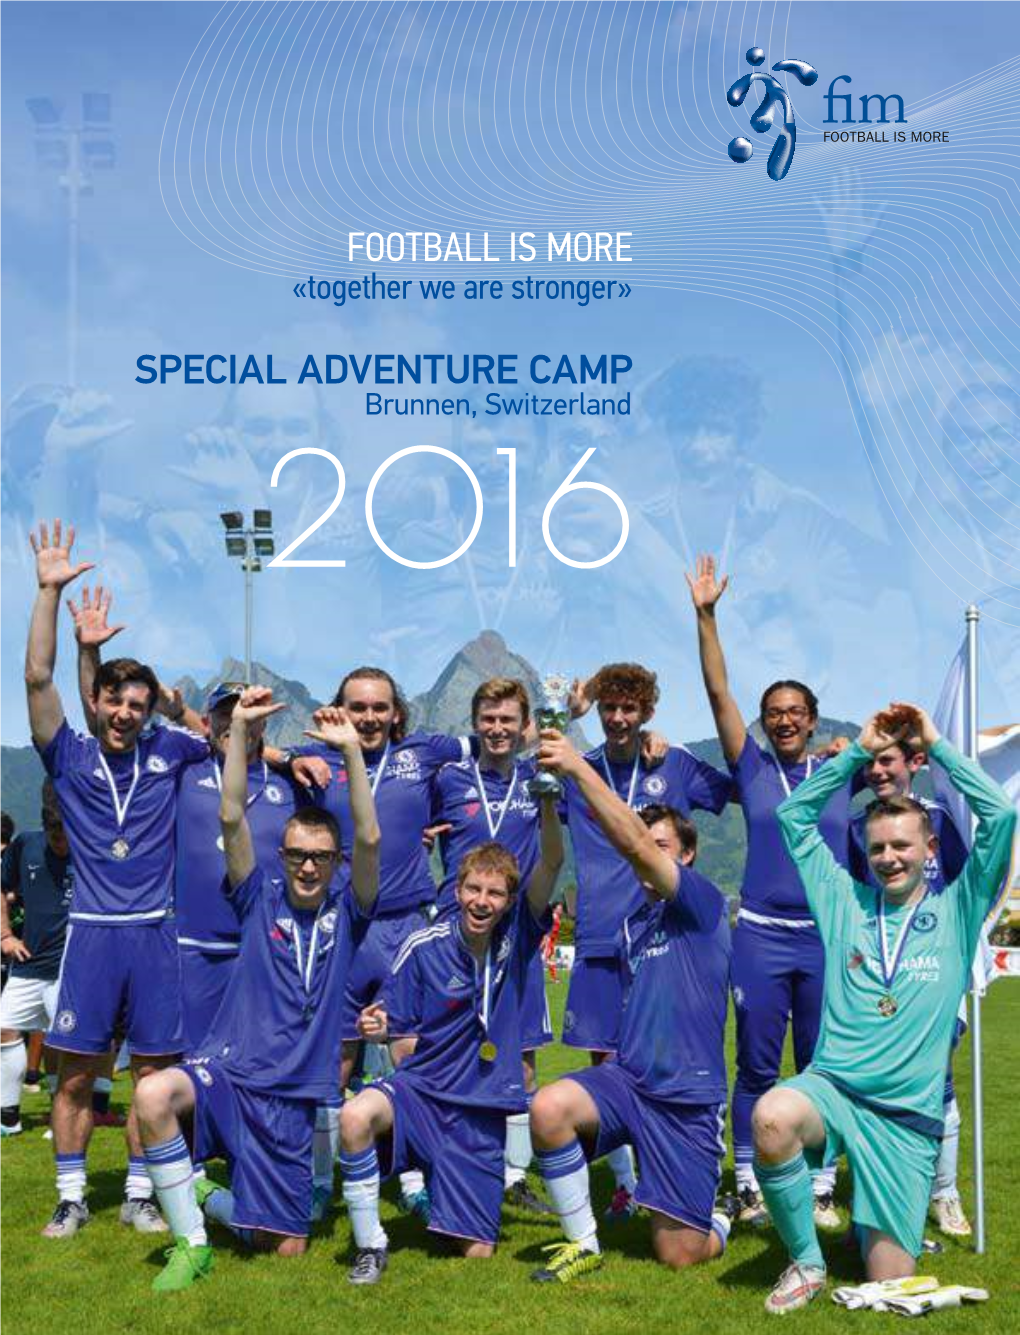 Football Is More Special Adventure Camp